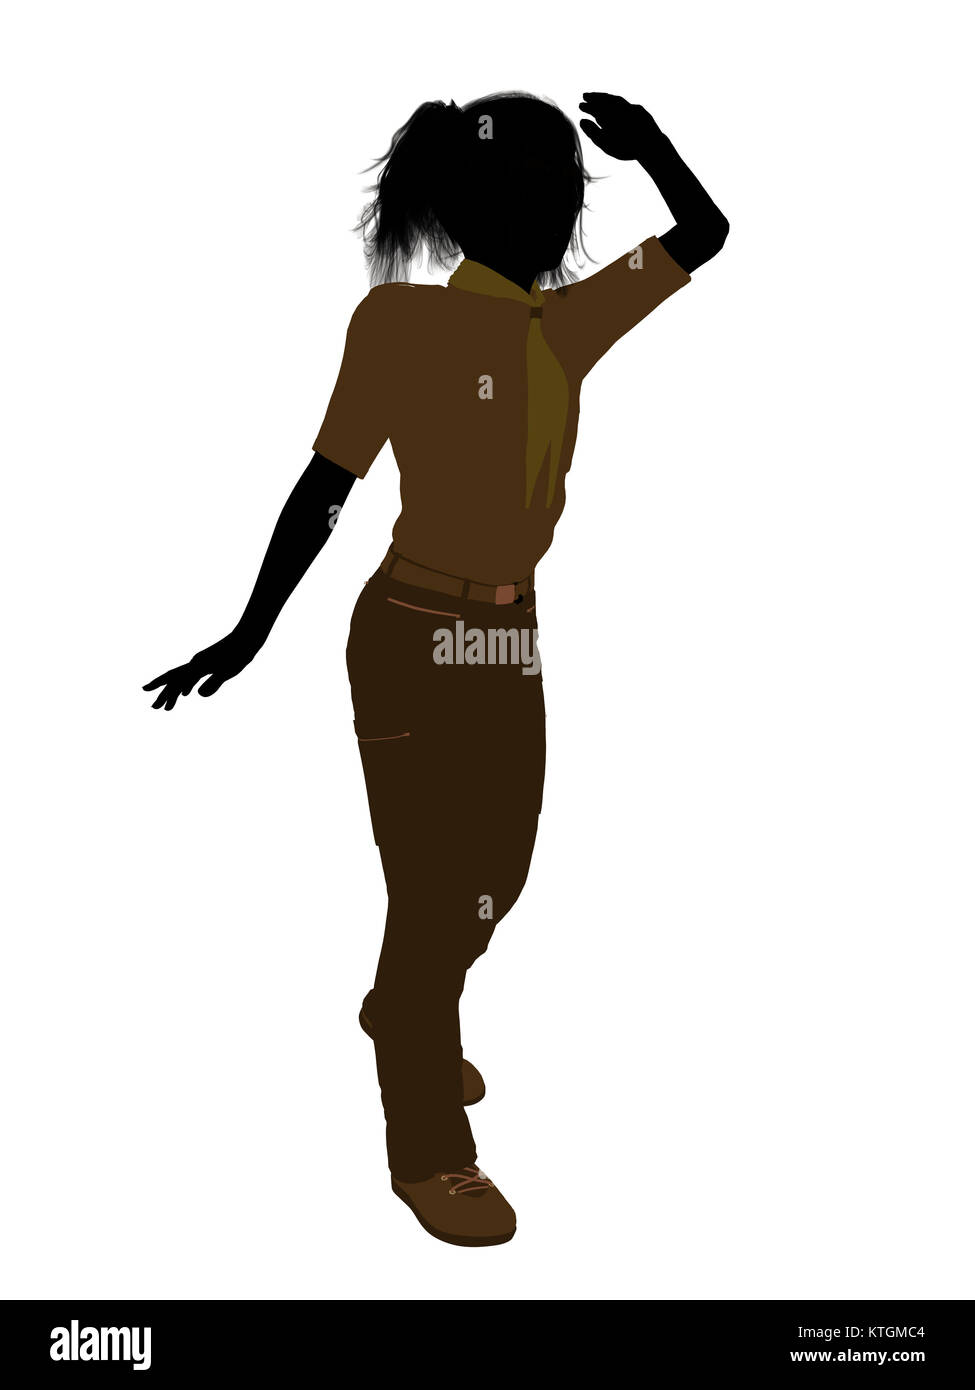 Girl scout silhouette dressed in pants on a white background Stock Photo